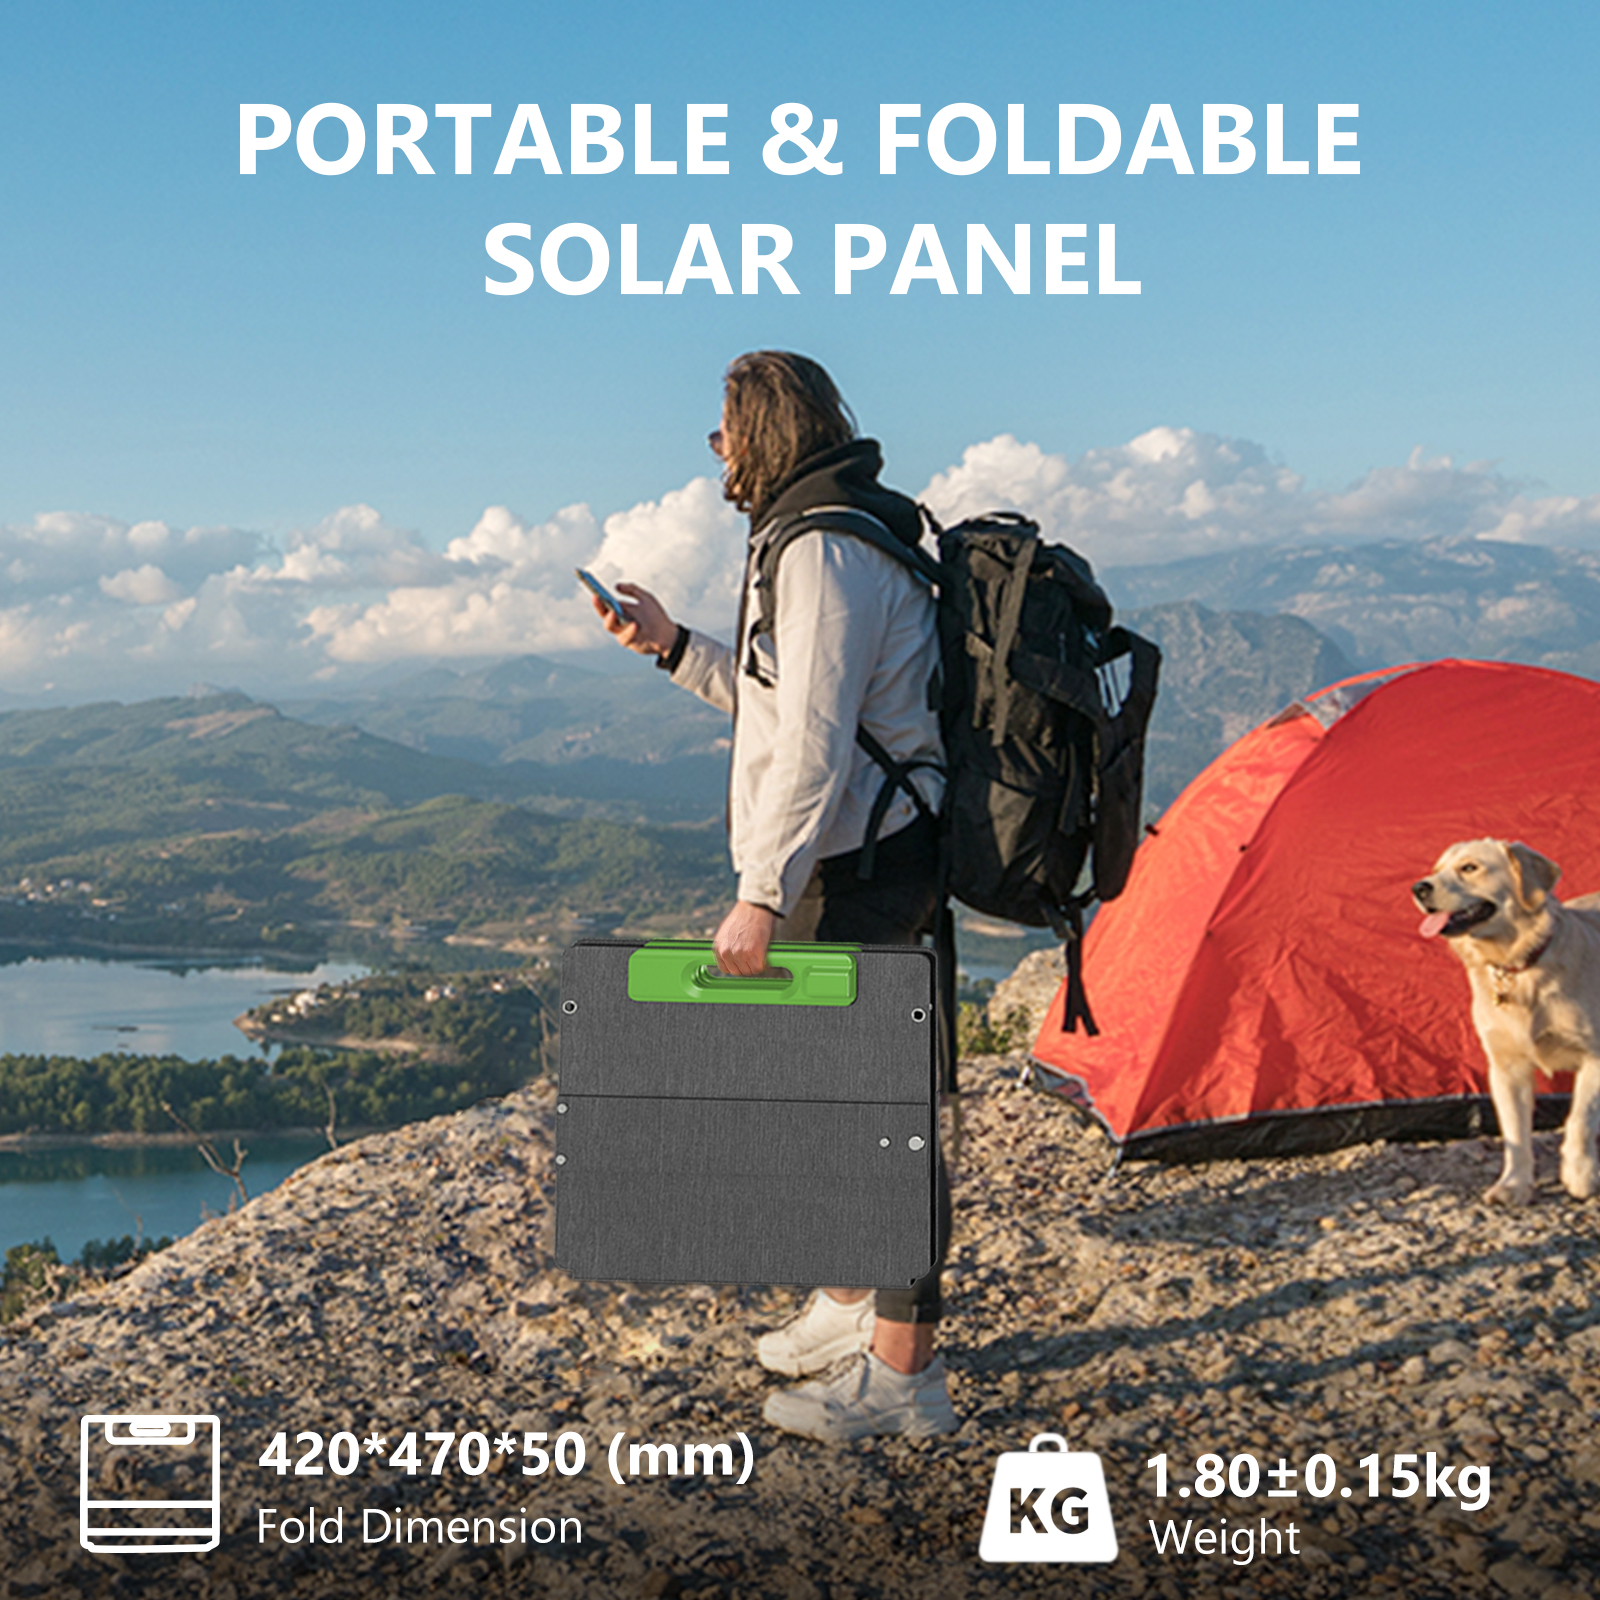 60W Portable Solar Panel for Power Station with kickstands IP65 waterproof Outdoor RV Camper Blackout